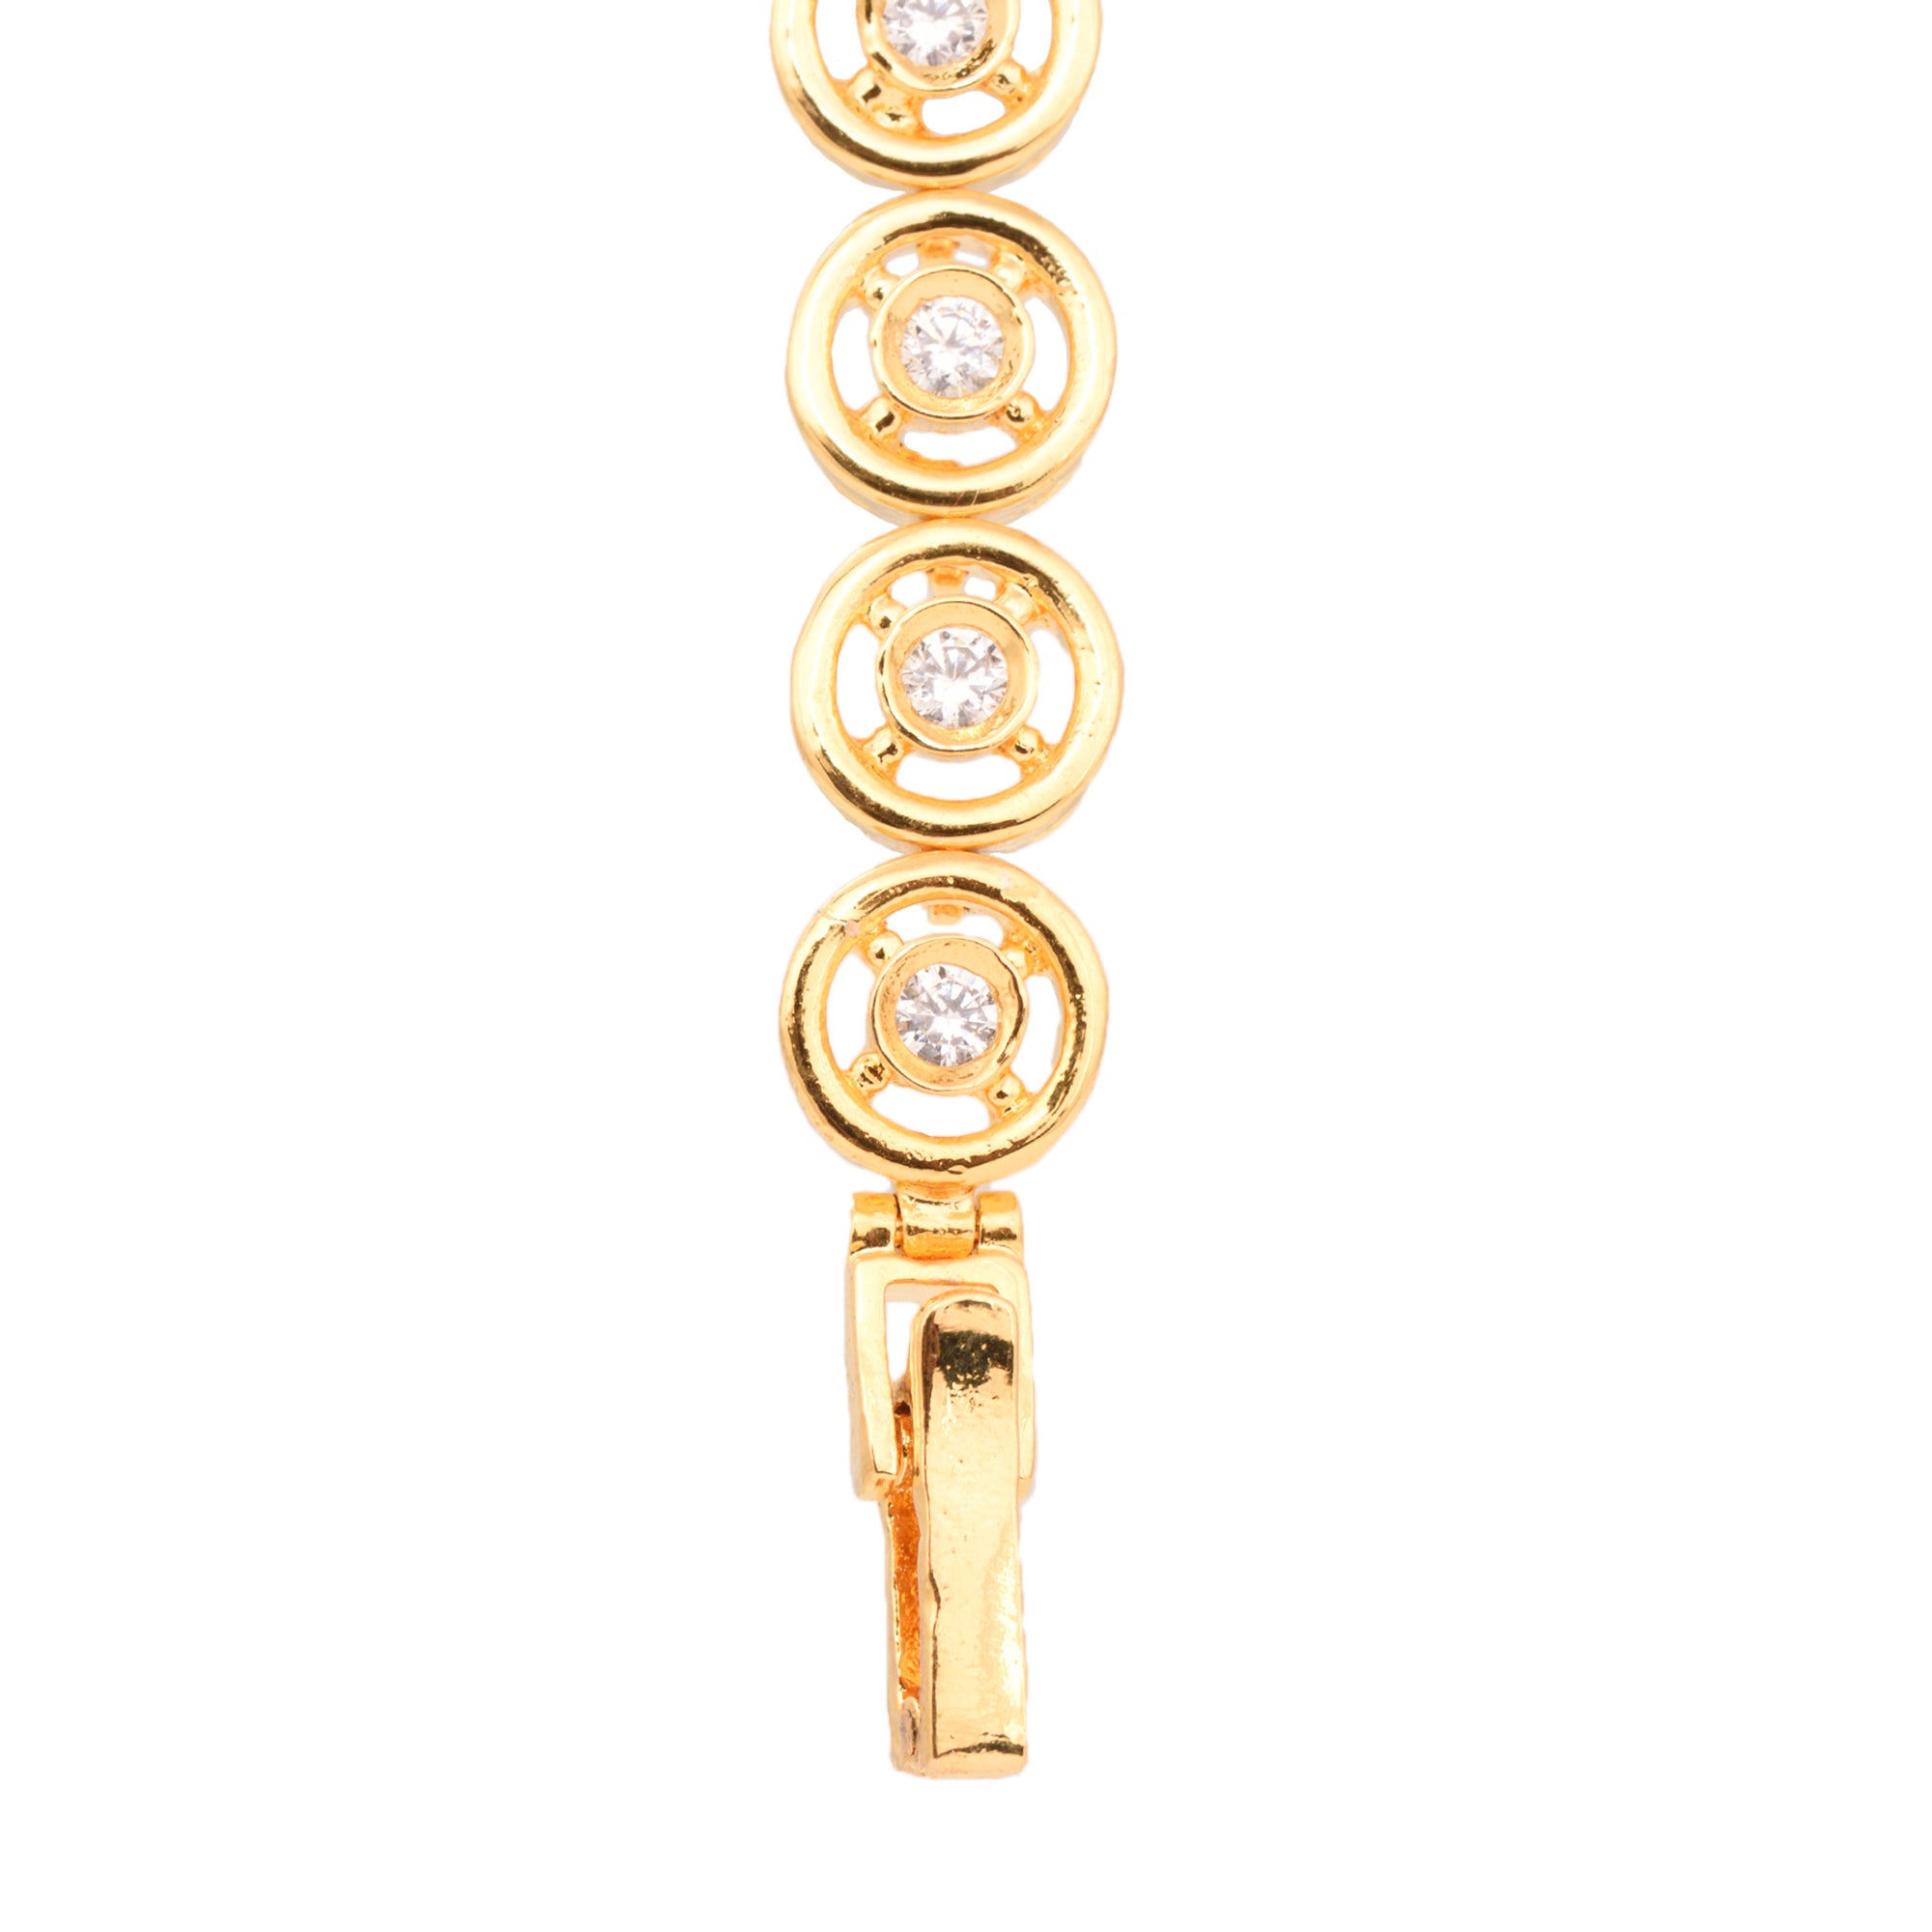 Gold Plated White Ad Studded Tennis Classy Bracelet For Women And Girls - Saraf Rs Jewellery